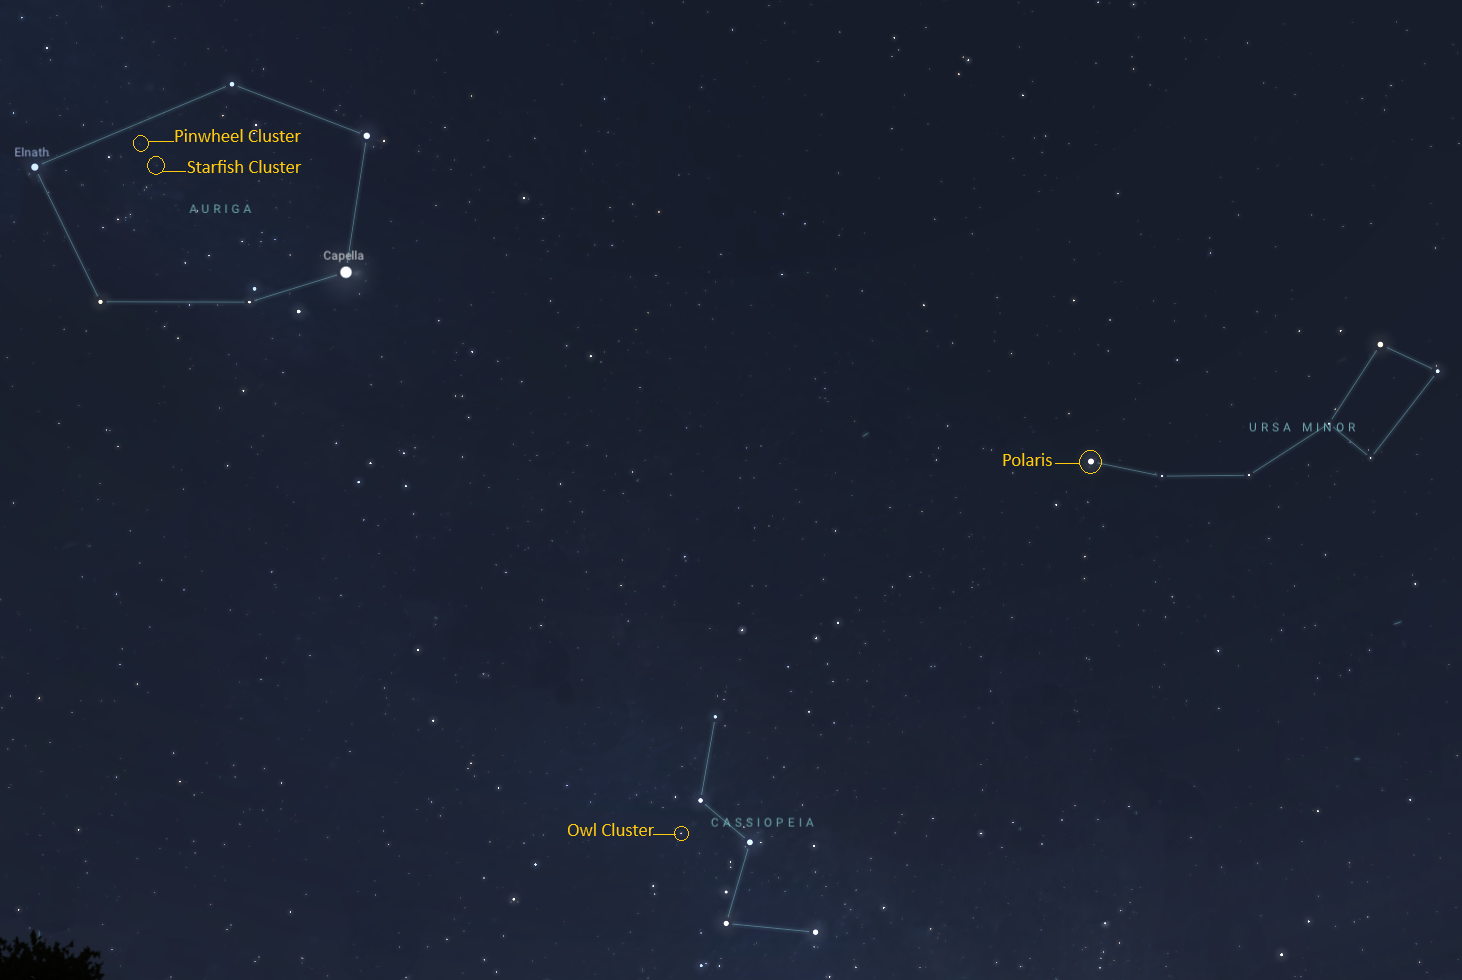 The counterclockwise constellations Auriga, Cassiopeia and Ursa Minor in the night sky, with four objects circled in yellow labeled: Pinwheel Cluster, Starfish Cluster, Owl Cluster, and Polaris